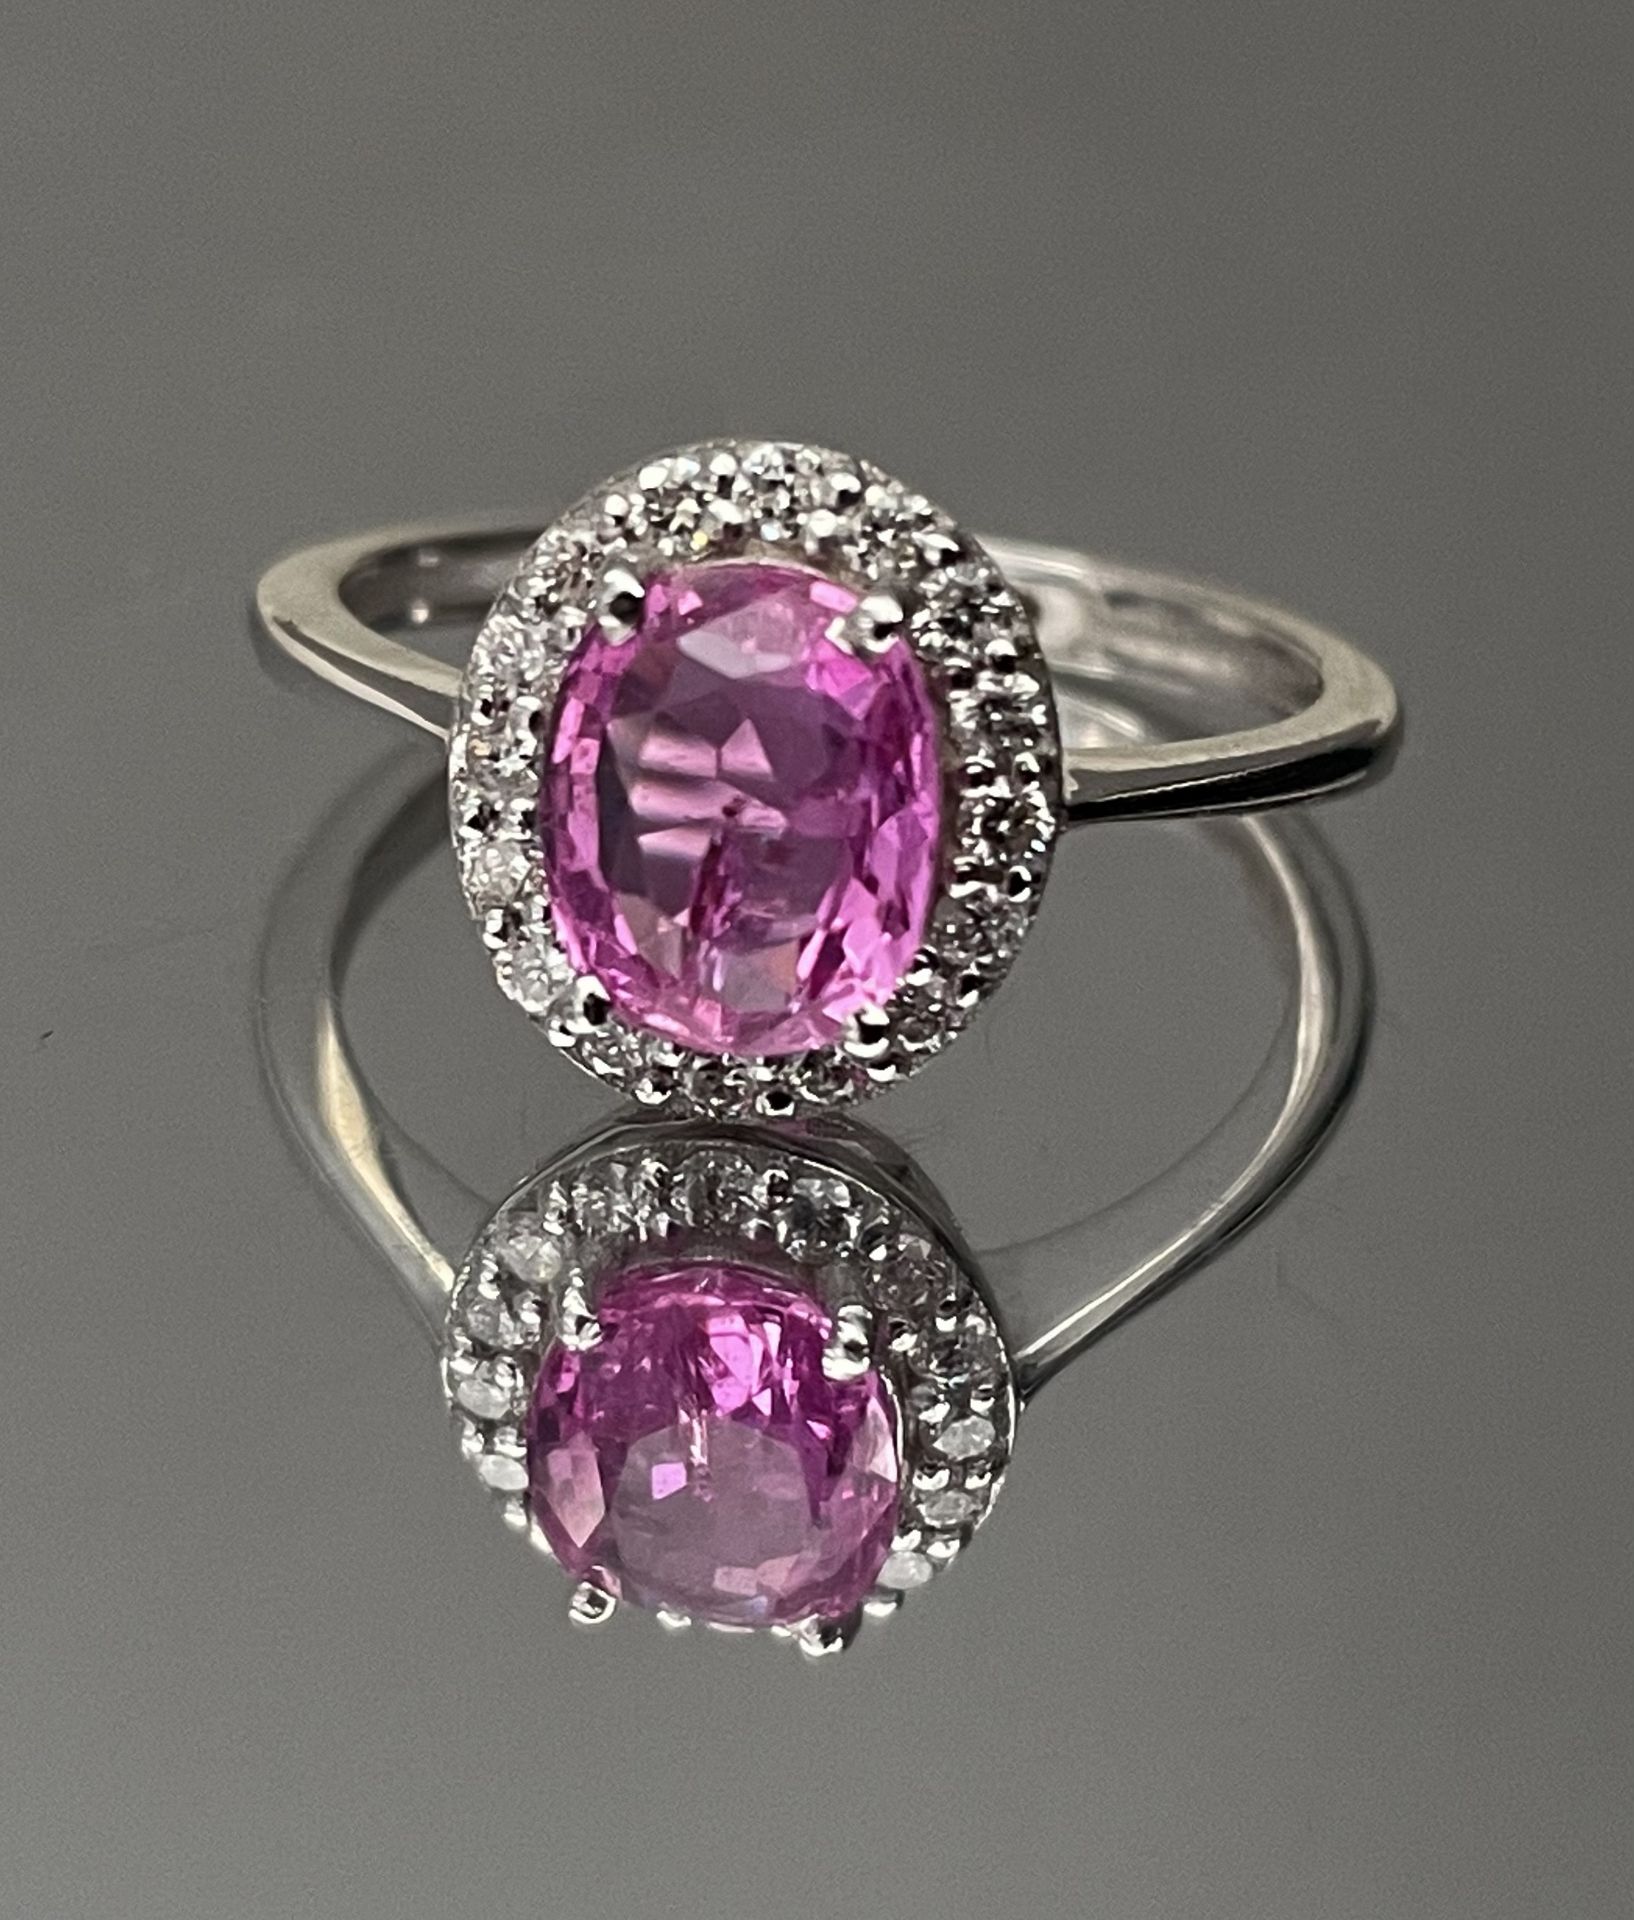 Beautiful Natural Ceylon Pink Sapphire With Natural Diamonds & 18k White Gold - Image 4 of 7